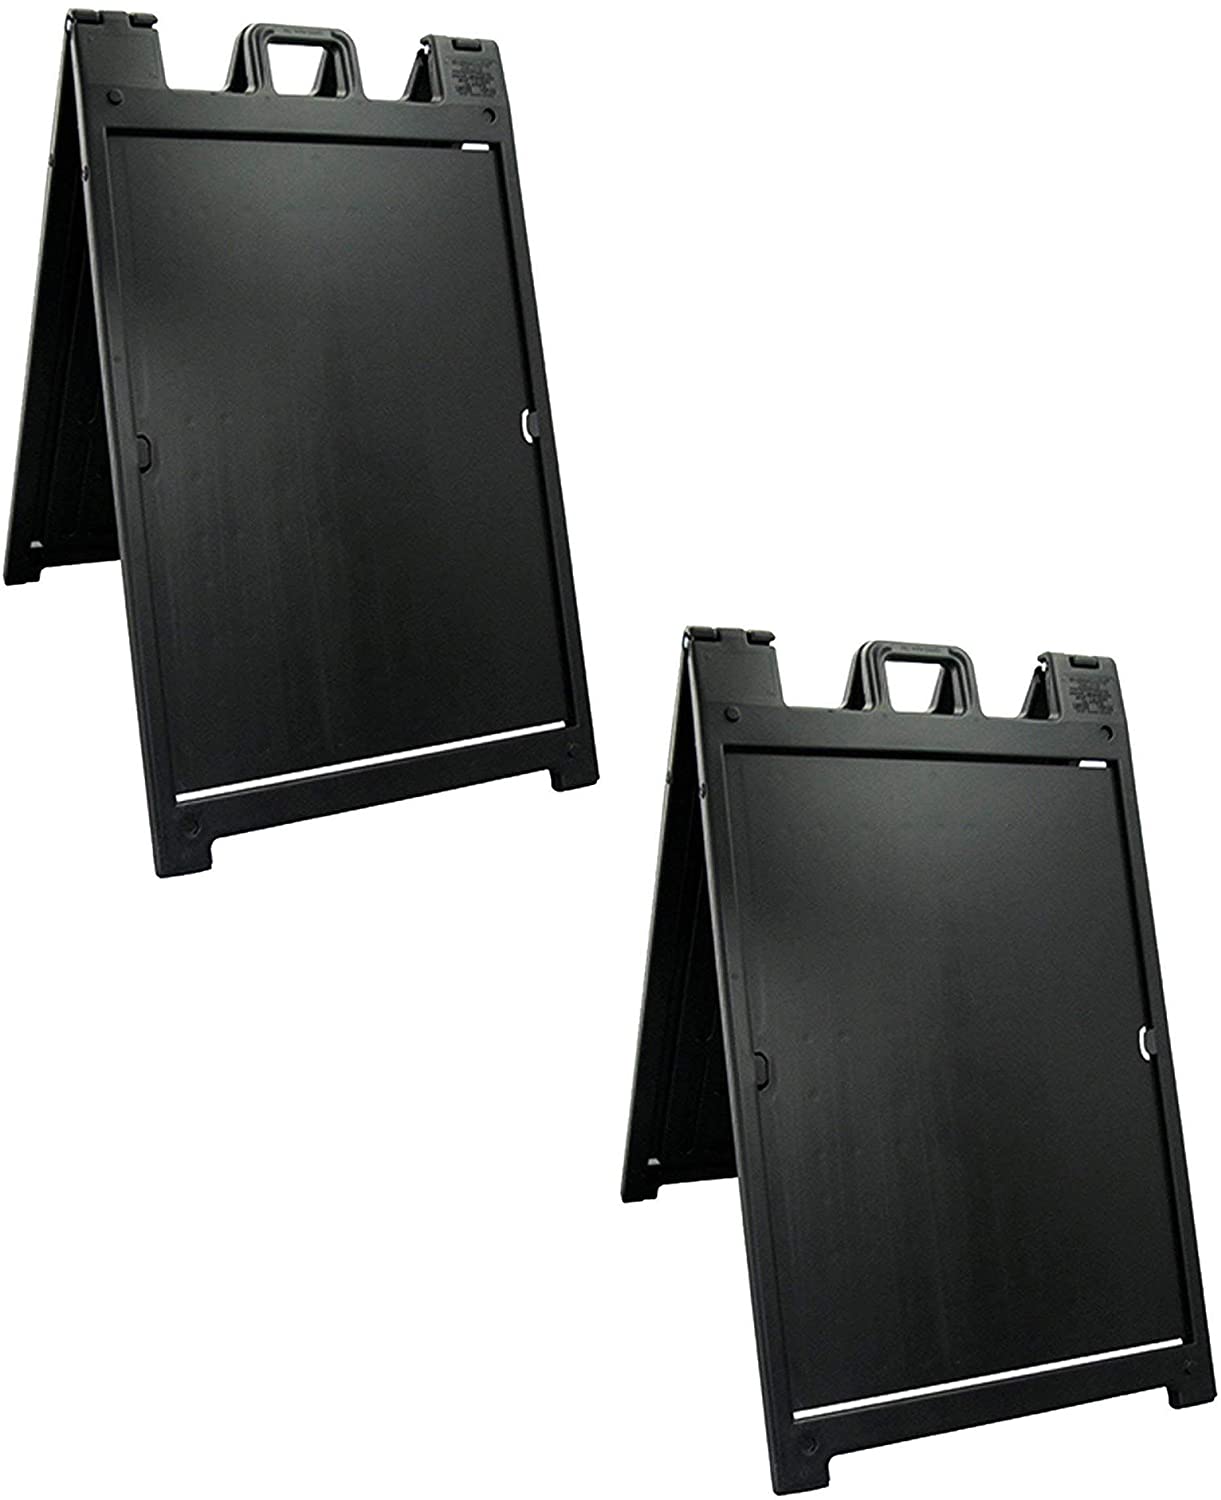 B08H5PPY2S Plasticade Deluxe Signicade Portable Folding Double Sided Sign Stand, Black (2 Pack)